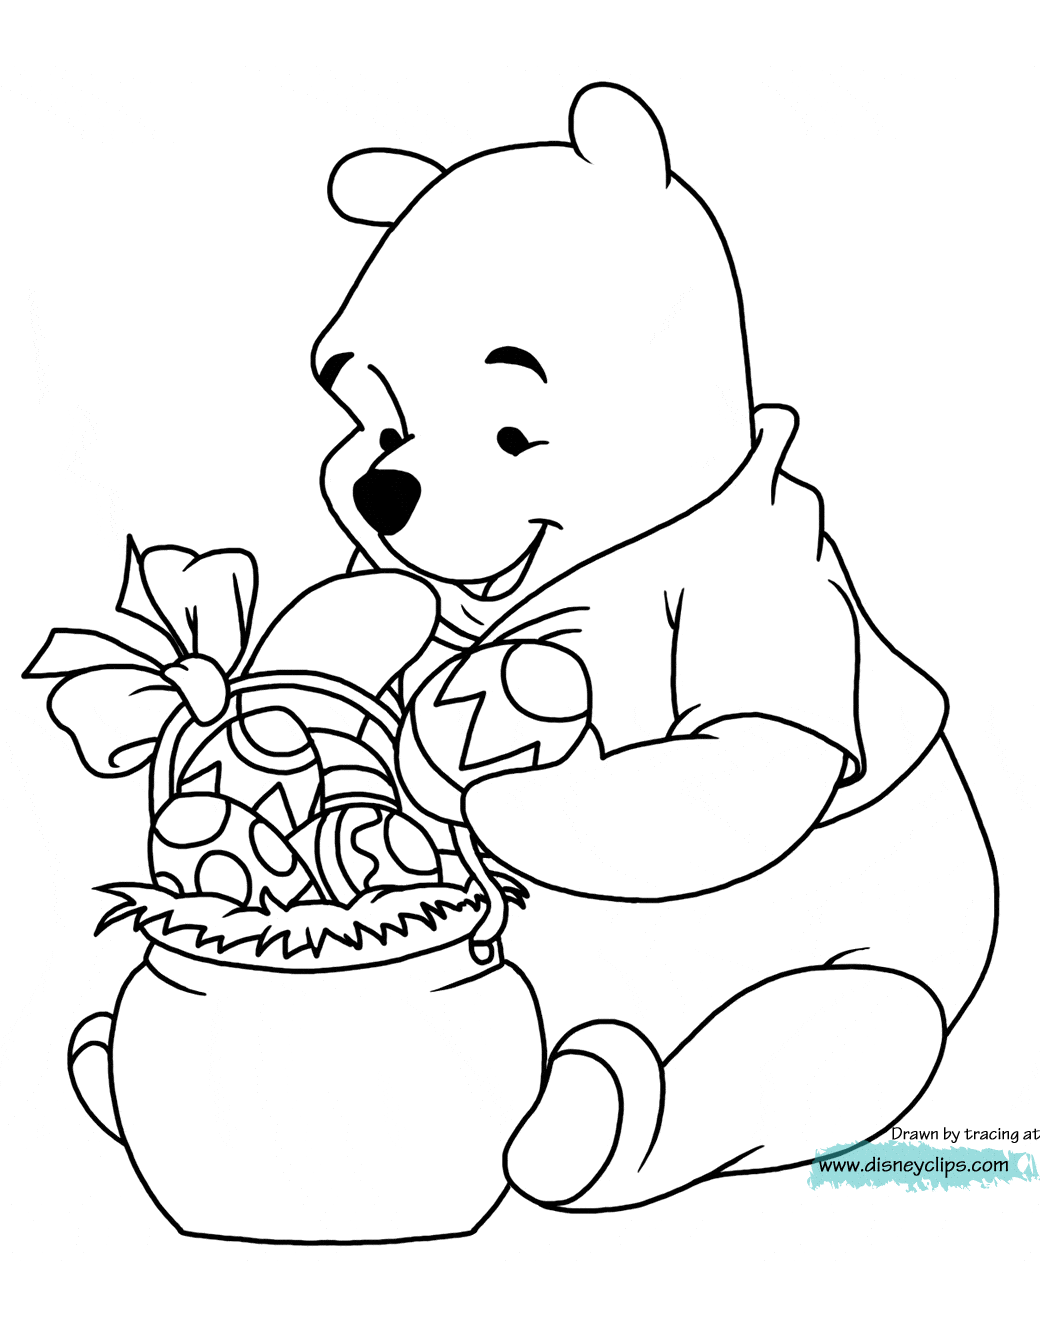 winnie the pooh easter coloring pages printable disney easter coloring pages 3 disneyclipscom pages easter pooh winnie coloring the 